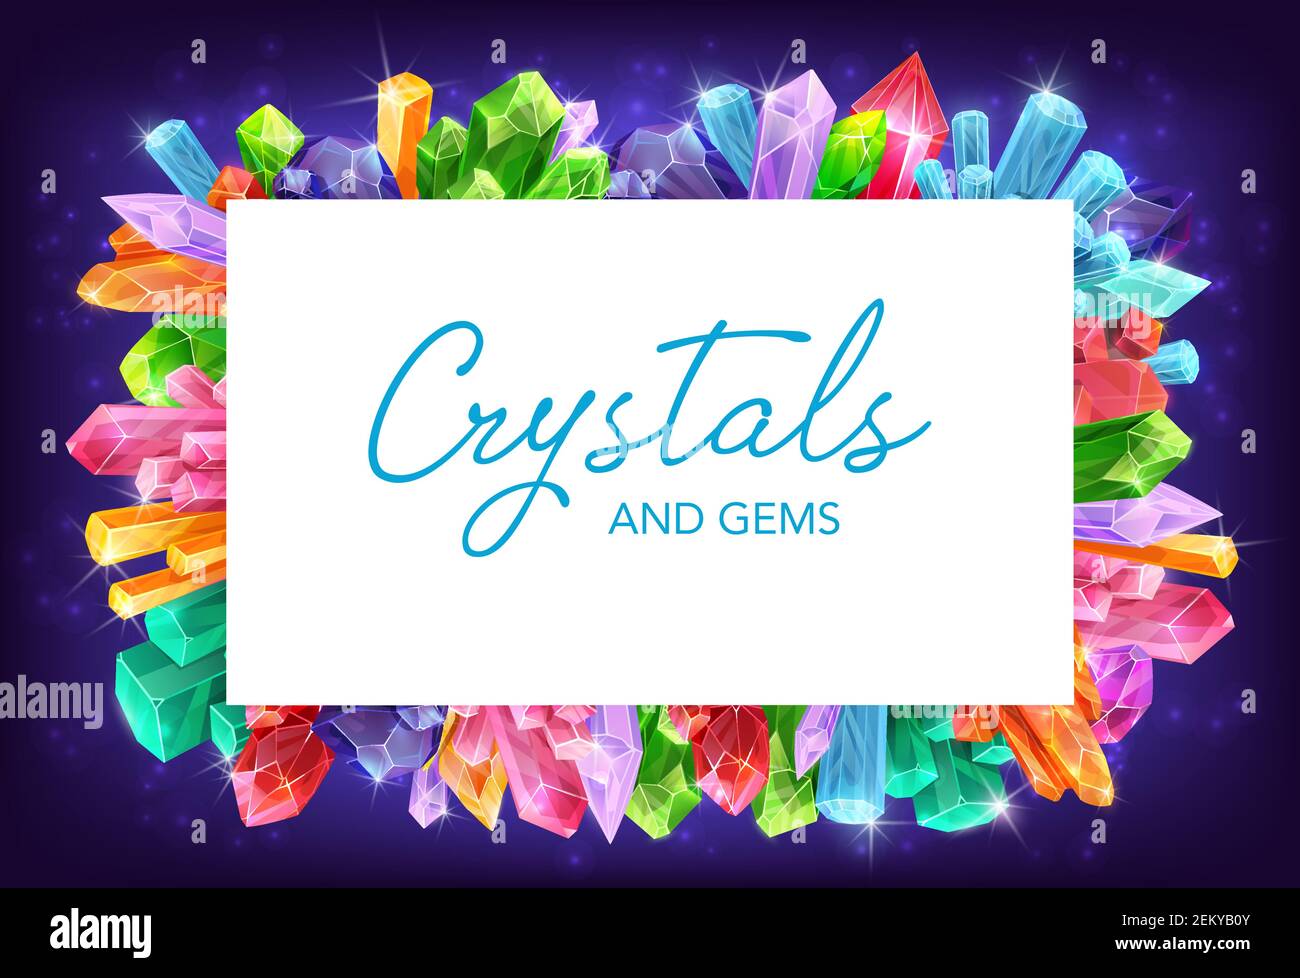 Crystals and gem stones vector frame of gemstones and mineral rocks borders. Diamond, quartz and amethyst precious jewels, glass, salt and brilliant, Stock Vector